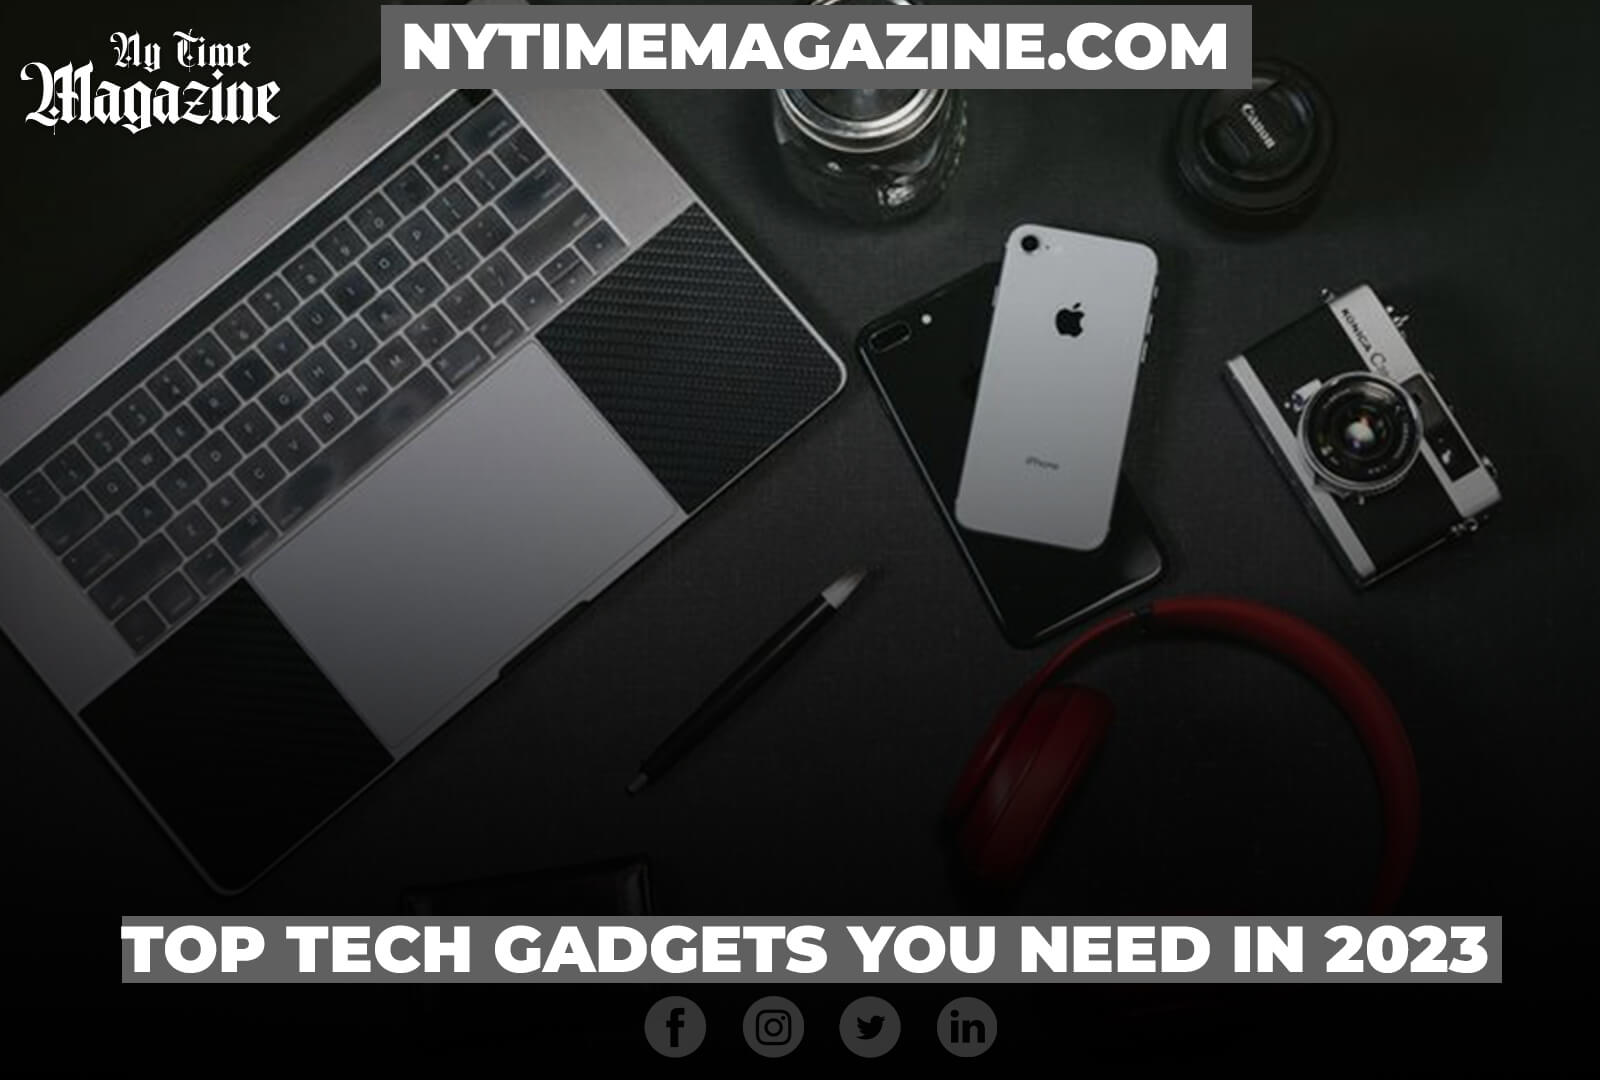 Top Tech Gadgets You Need in 2023